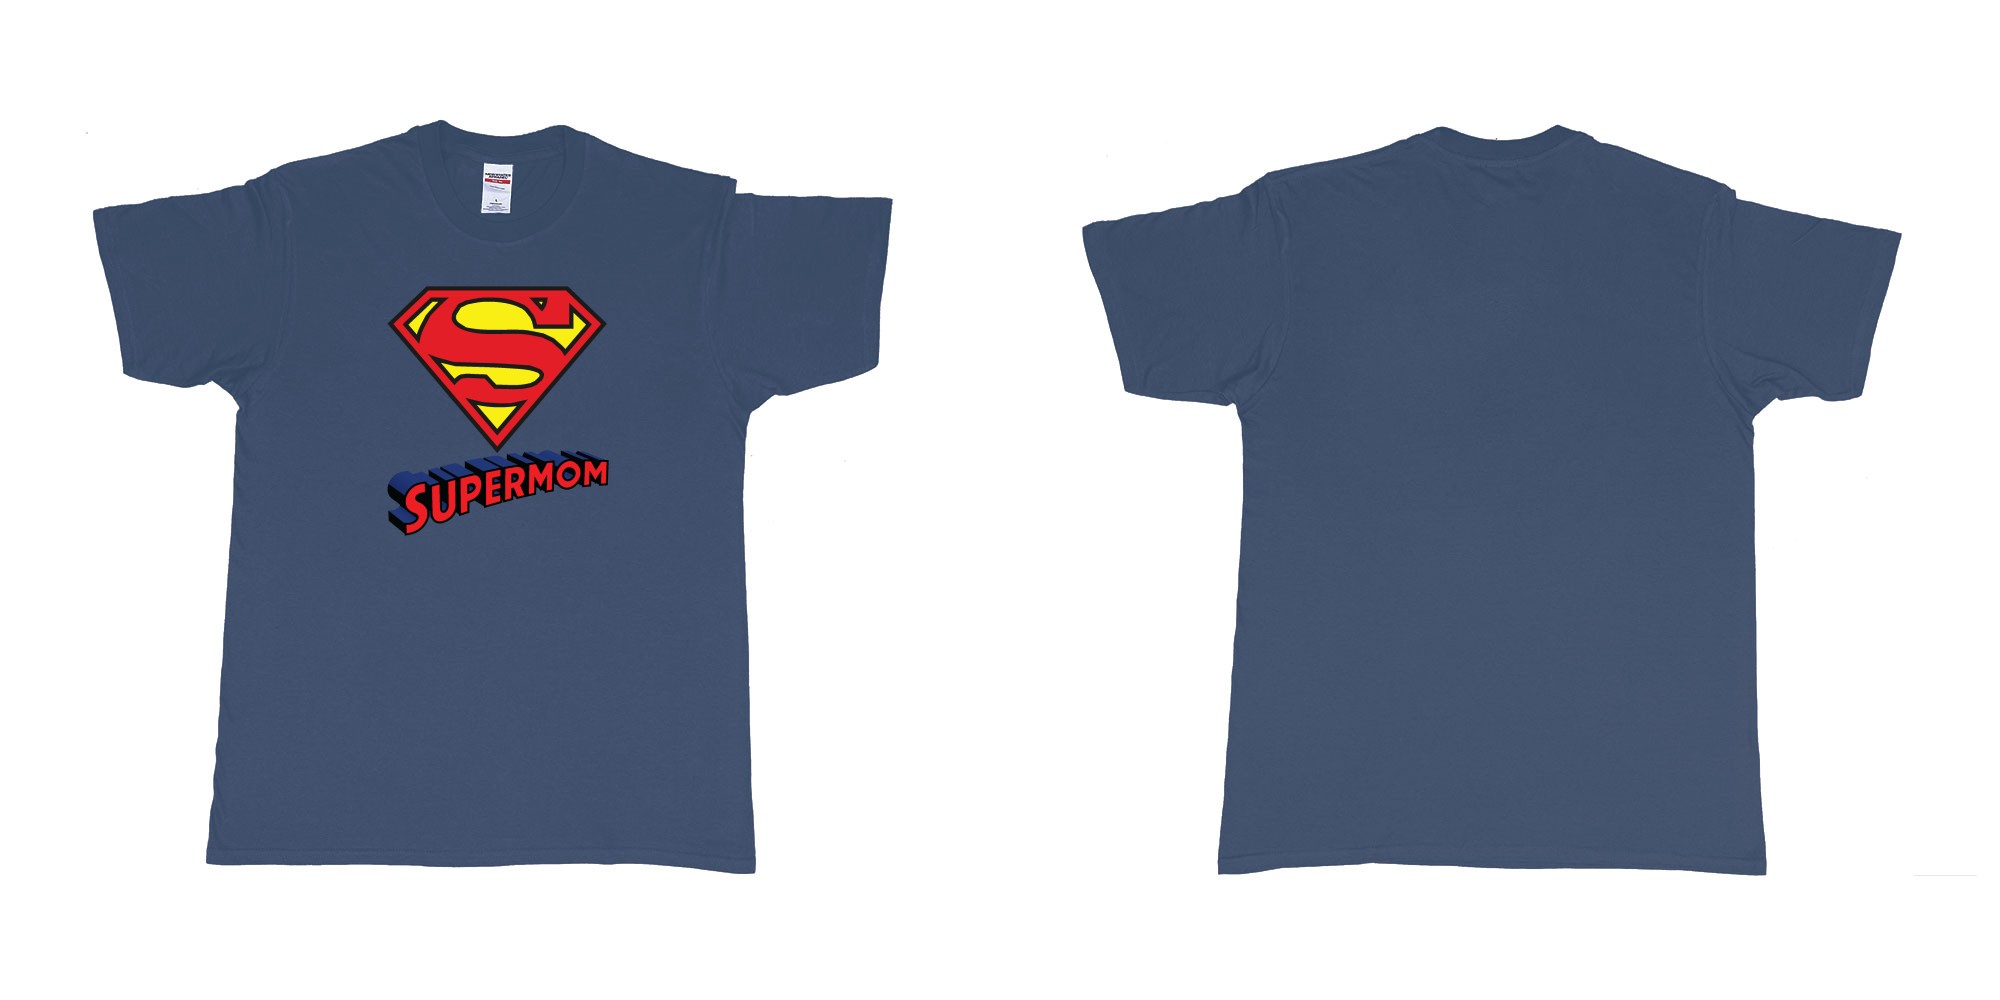 Custom tshirt design superman logo with own custom text print bali in fabric color navy choice your own text made in Bali by The Pirate Way